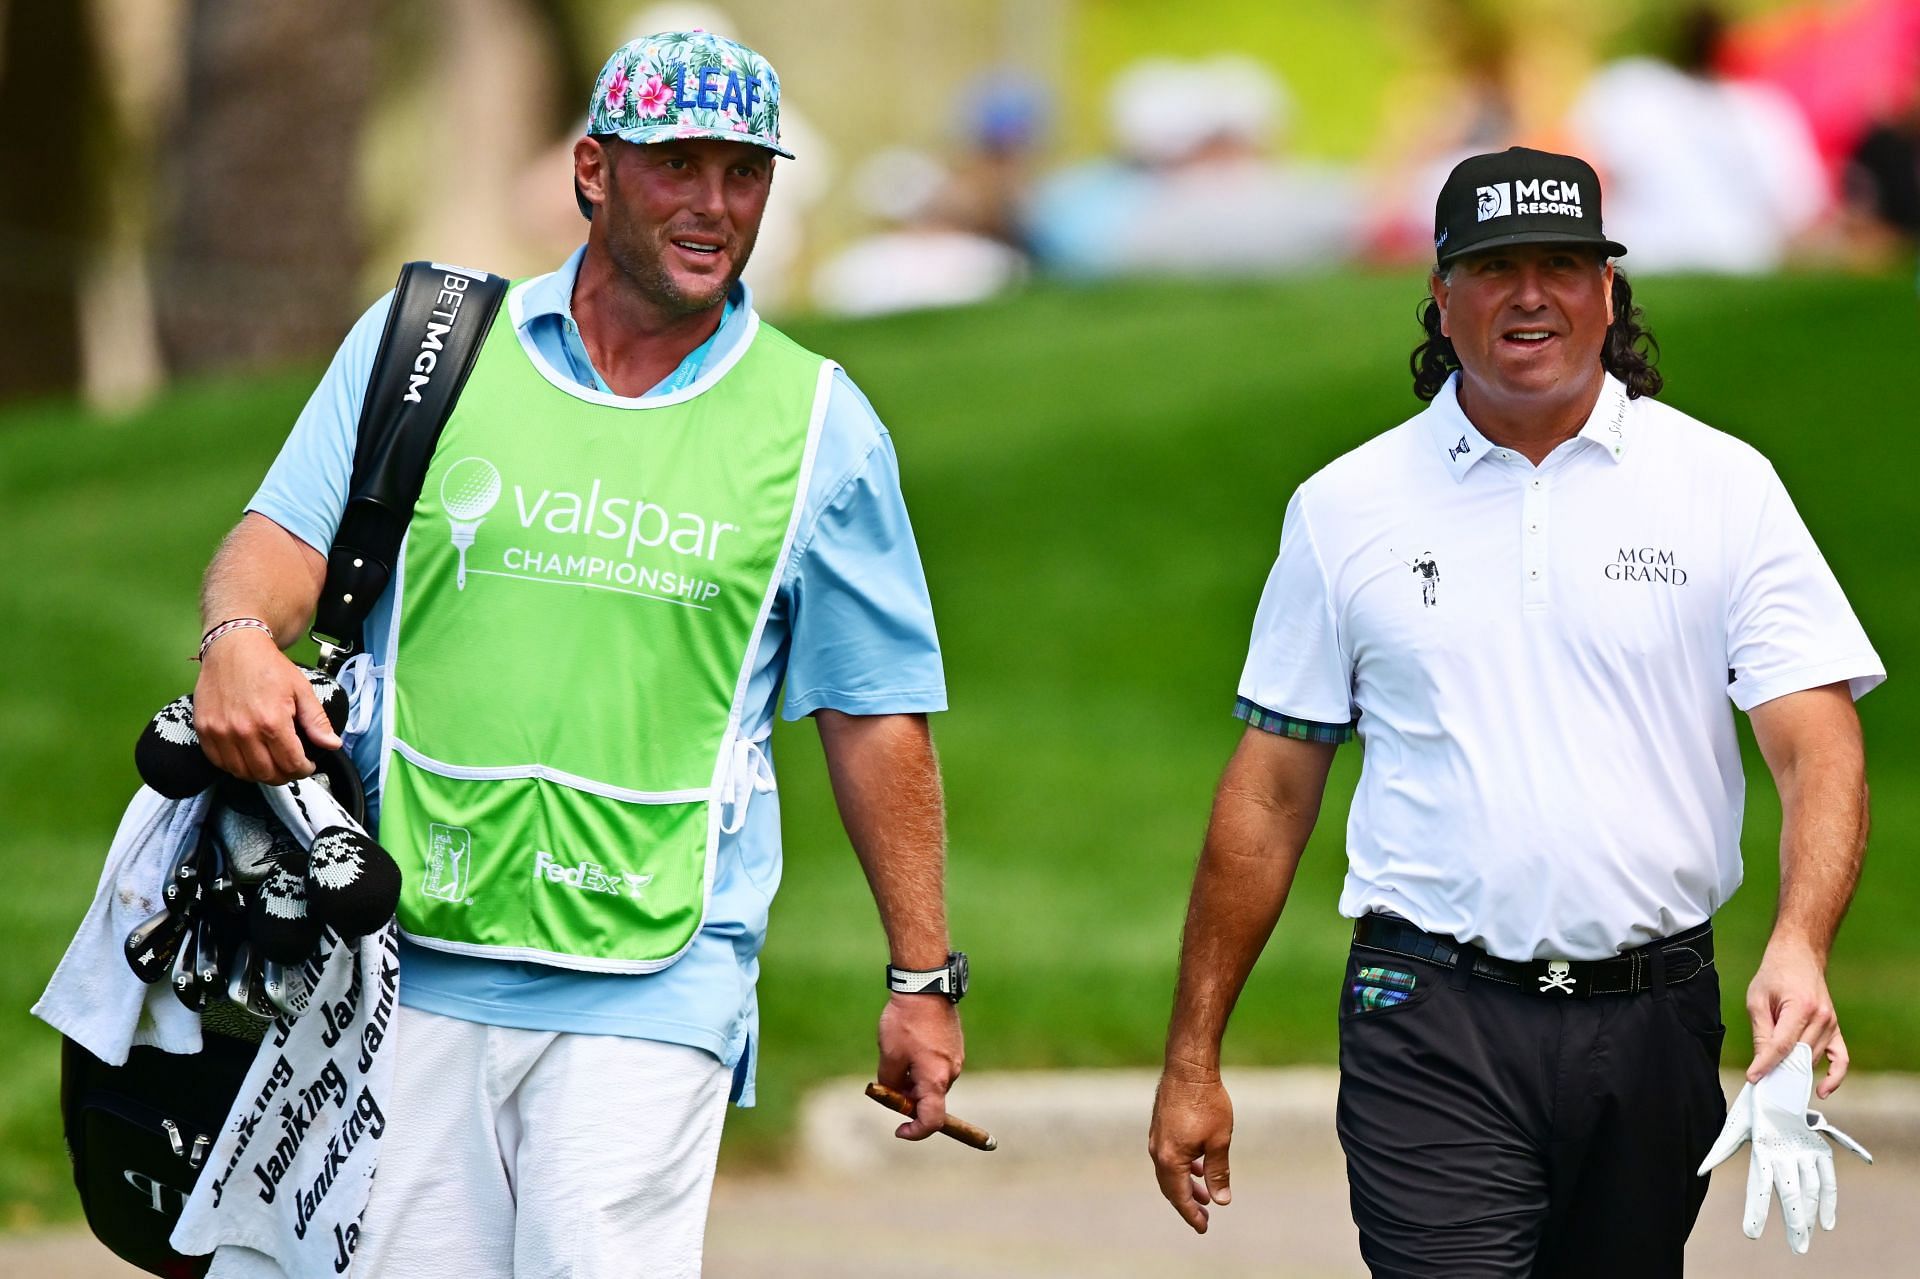 Real reason explained on why caddies wear nicknames on bibs at Valspar ...